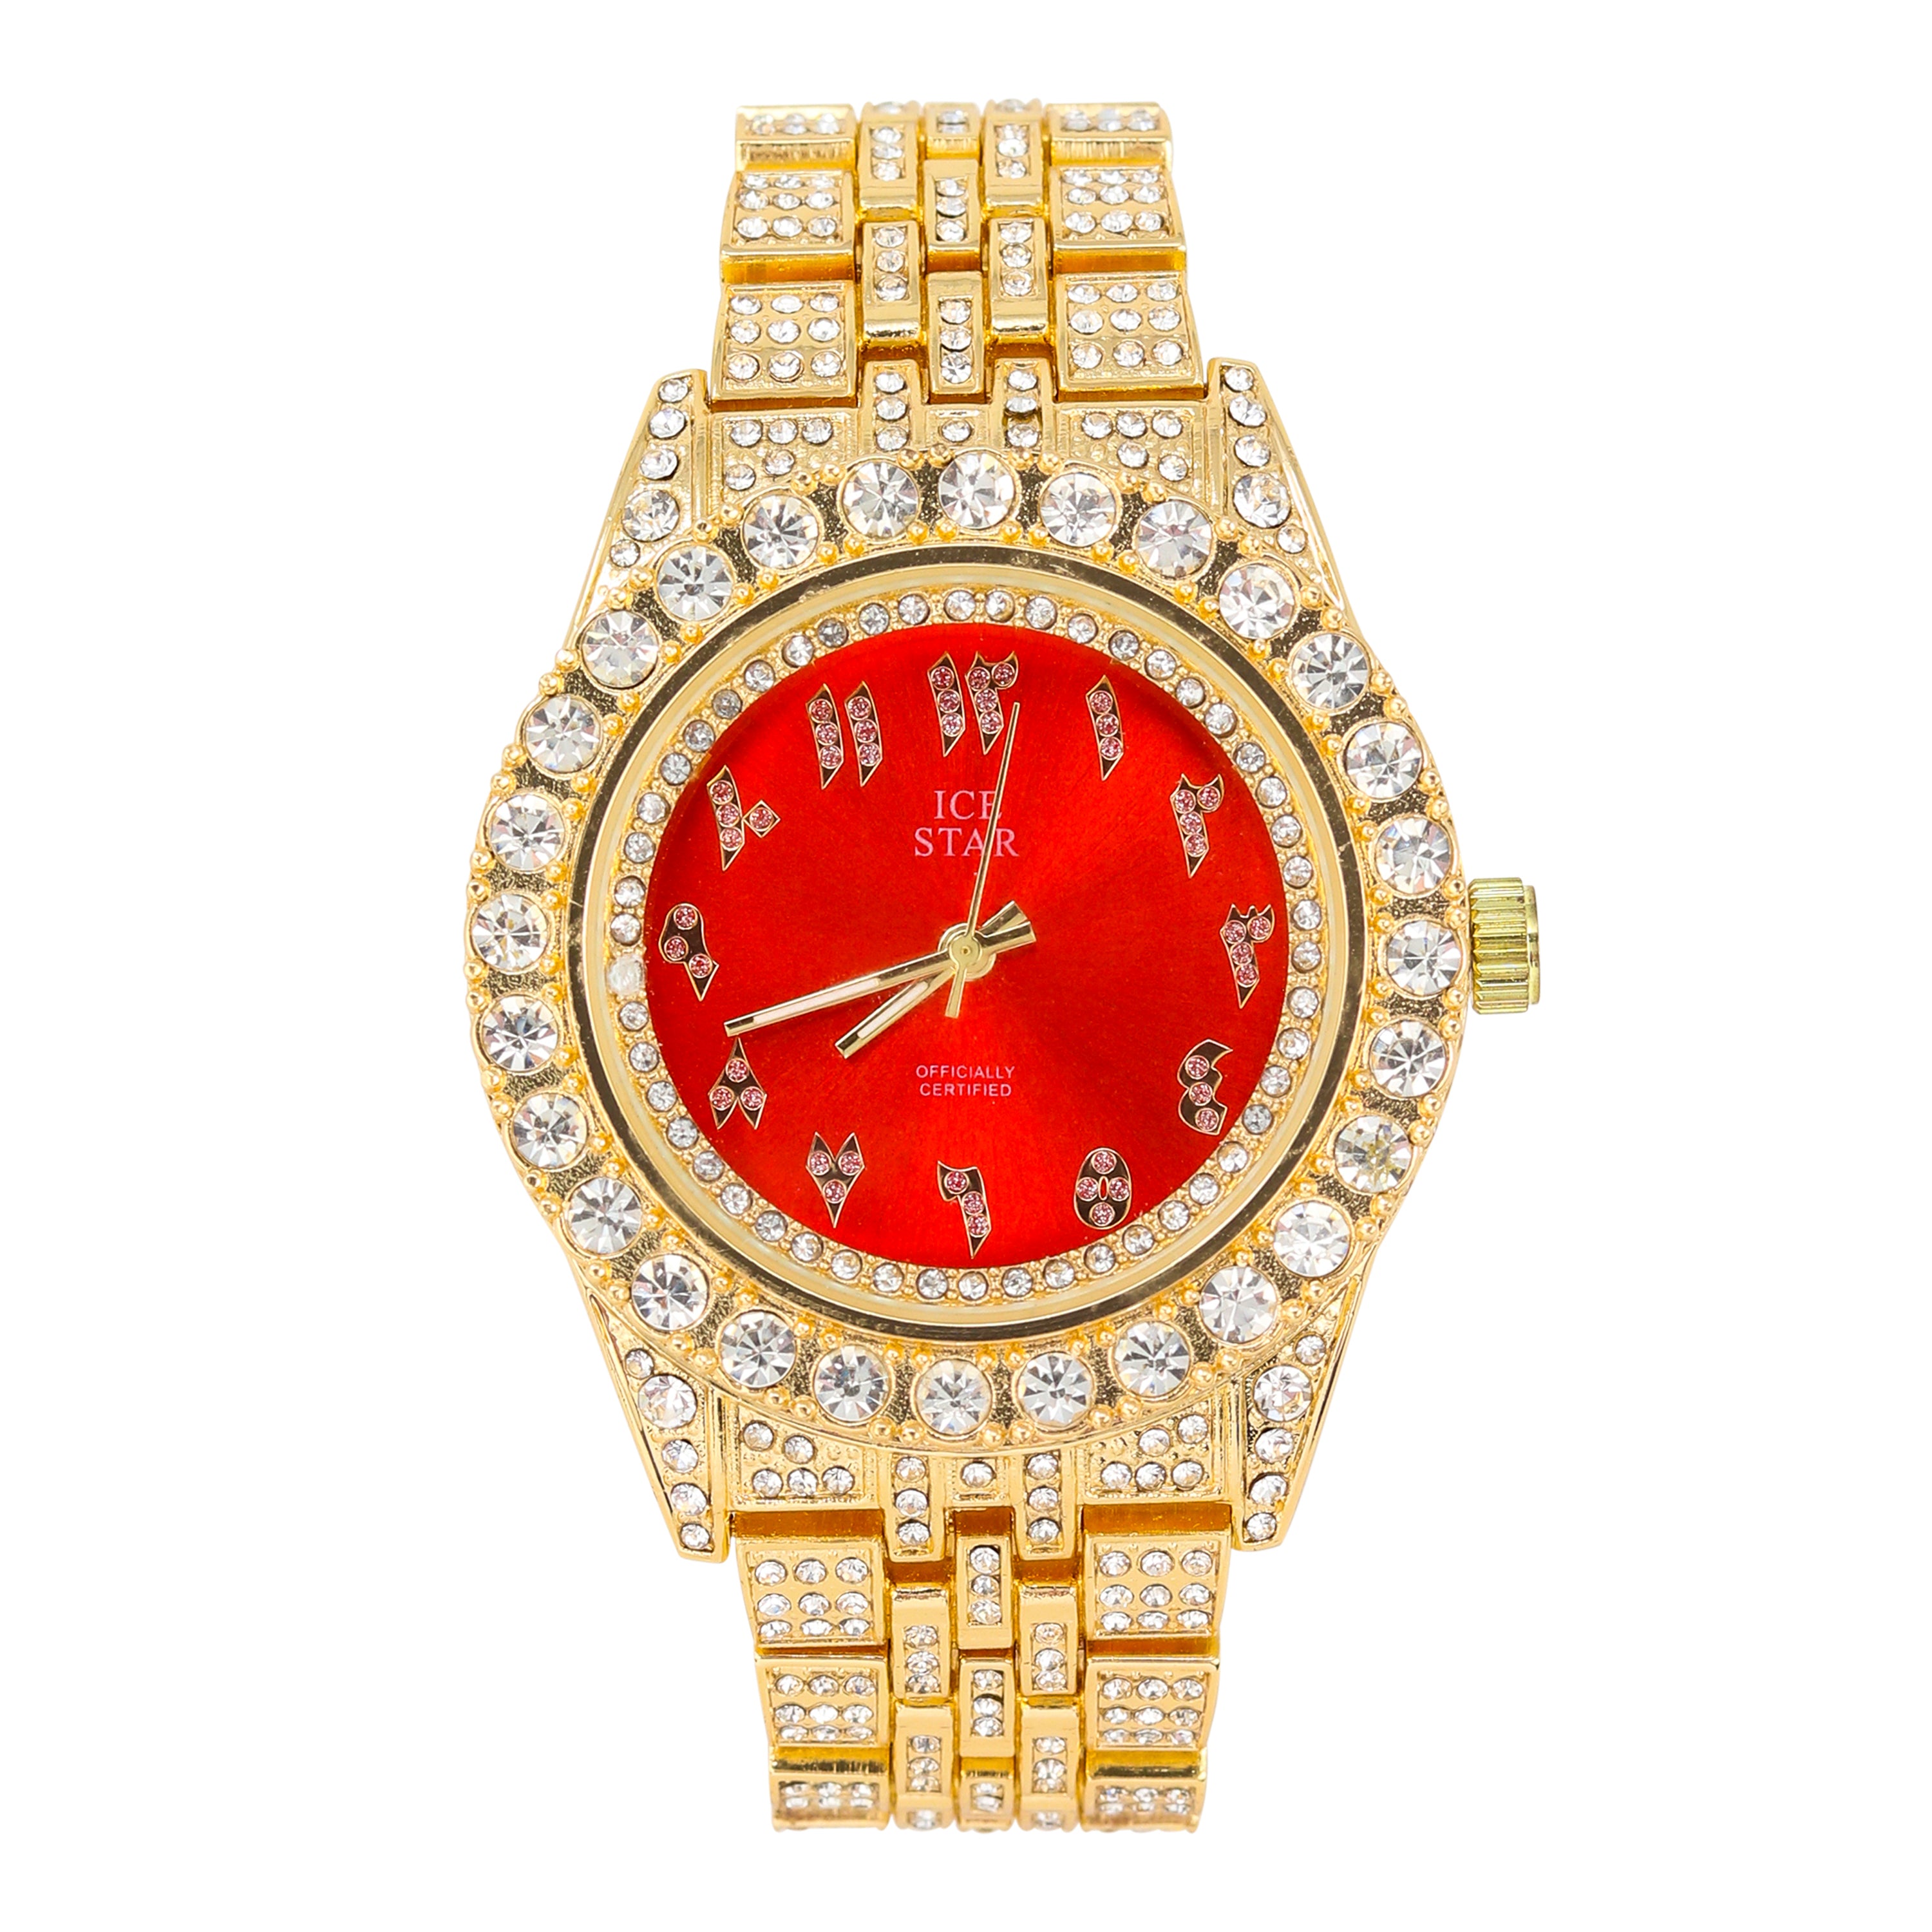 Men's Round Iced Out Watch 44mm Gold - Arab Dial